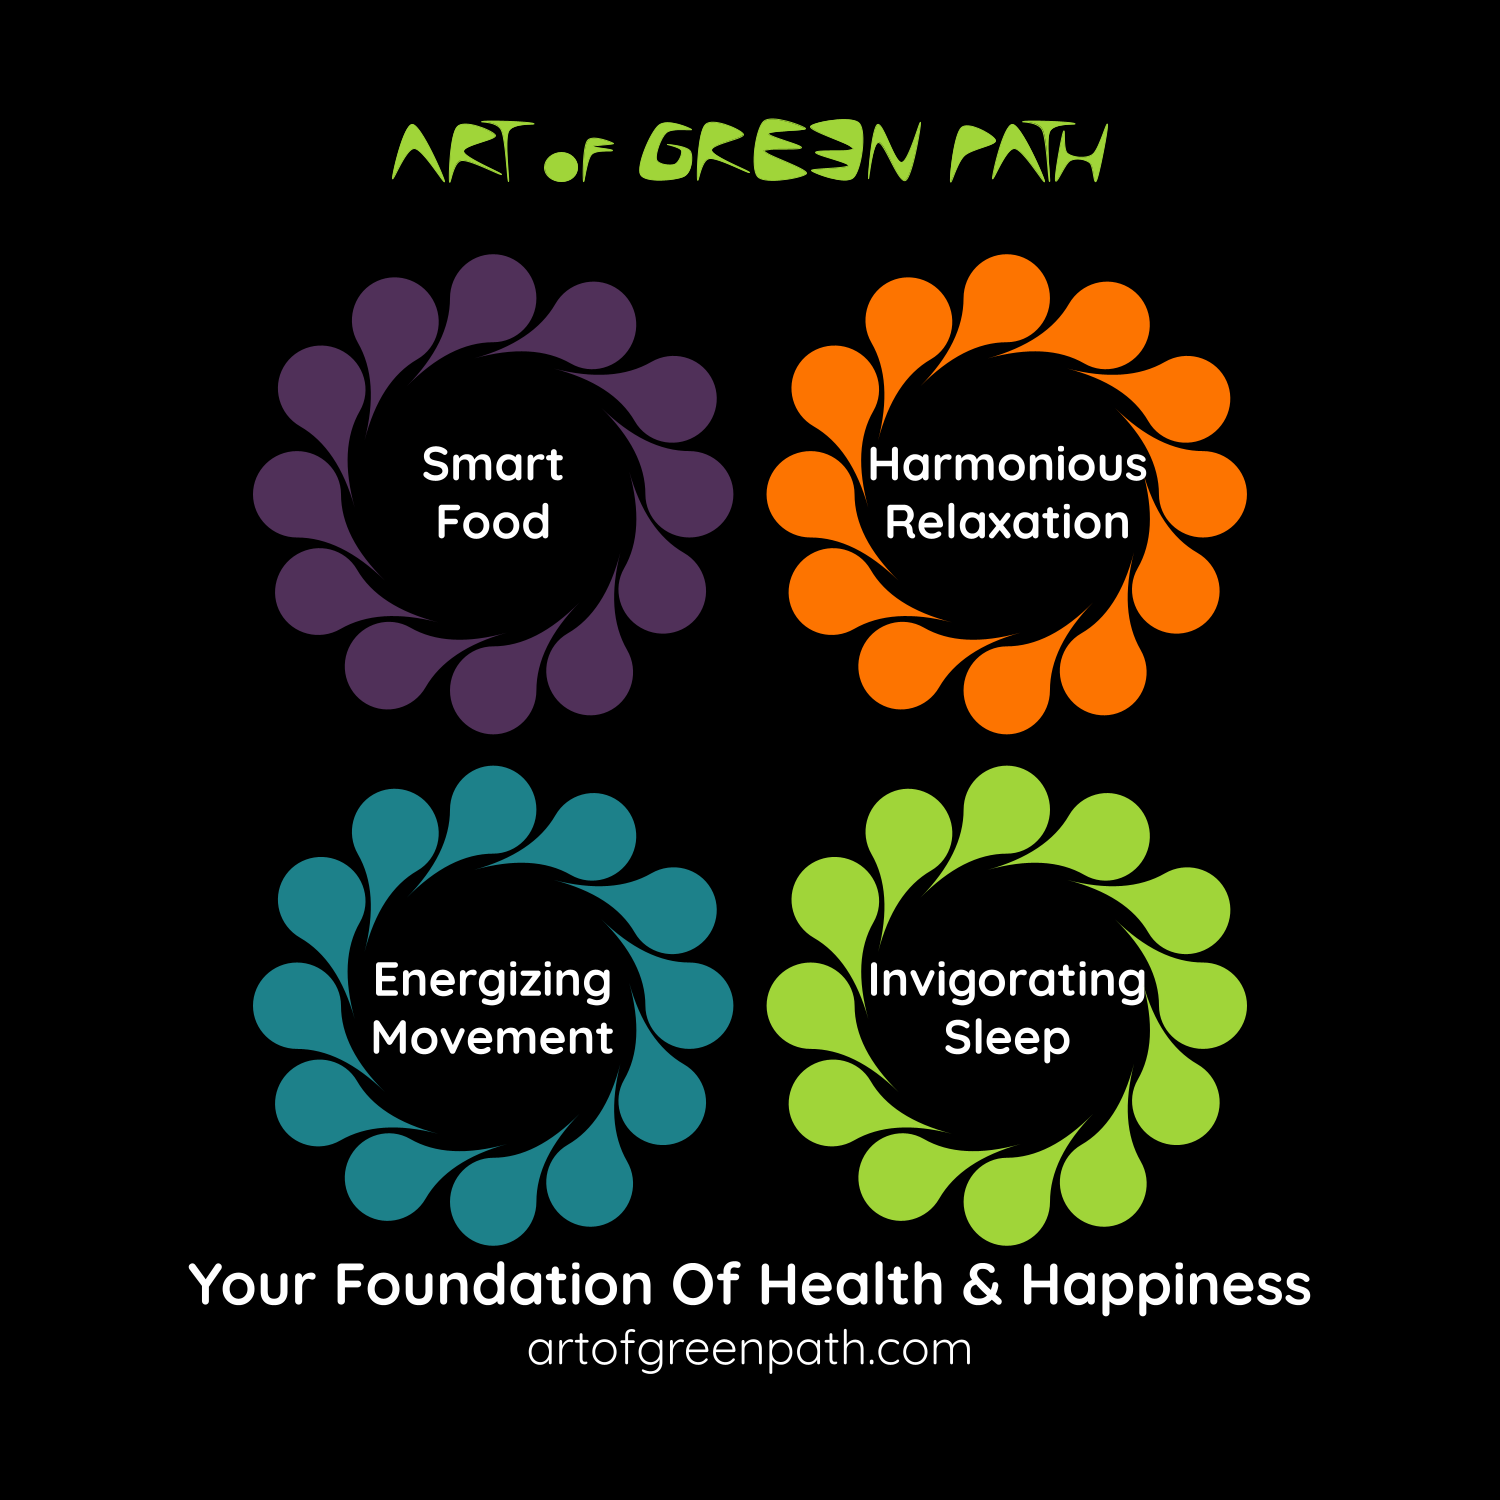 Art Of Green Path - Your Foundation Of Health & Happiness